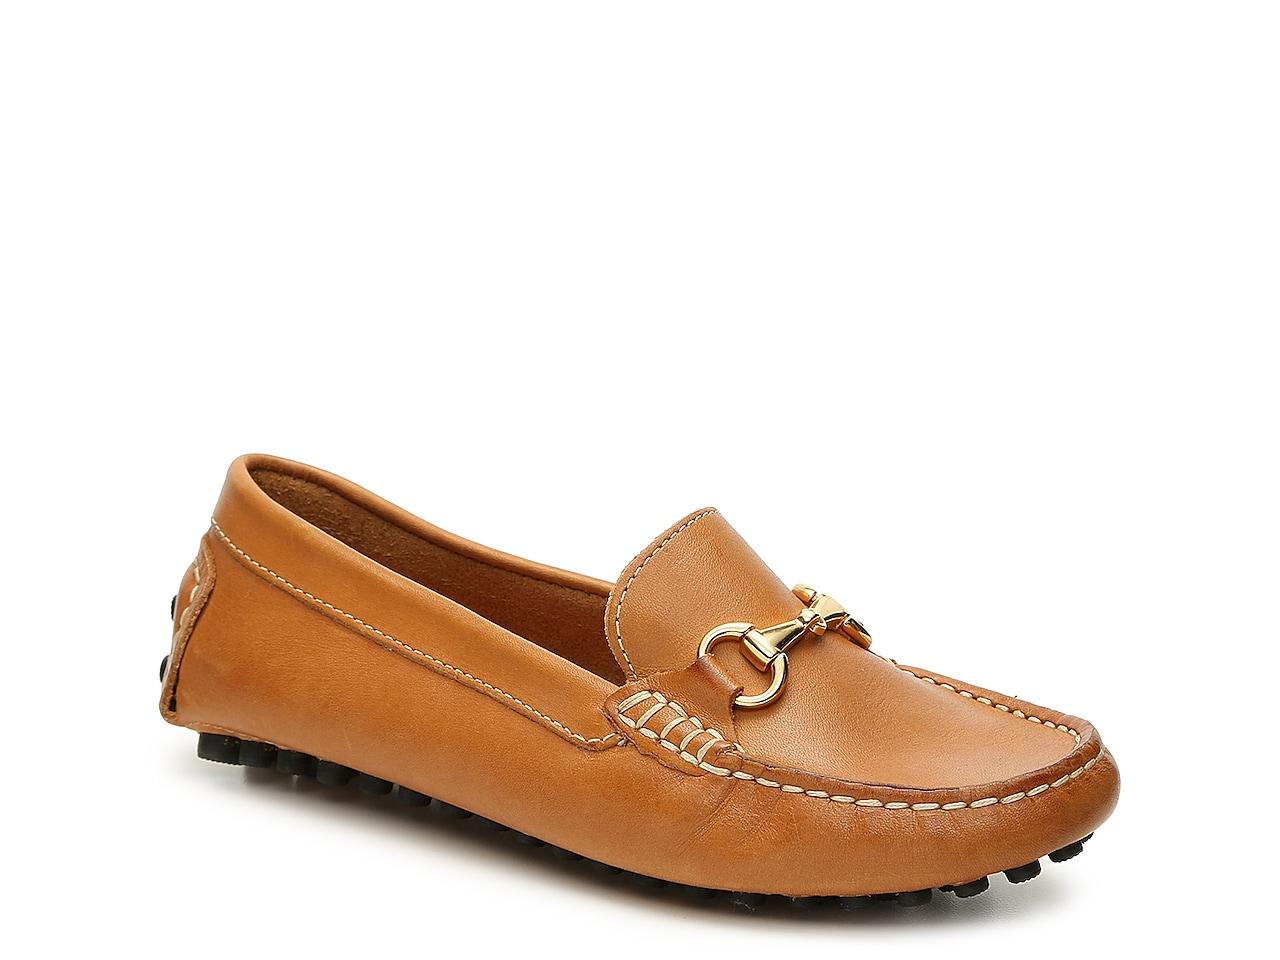 Mercanti Fiorentini Bit Driving Loafer in Brown | Lyst